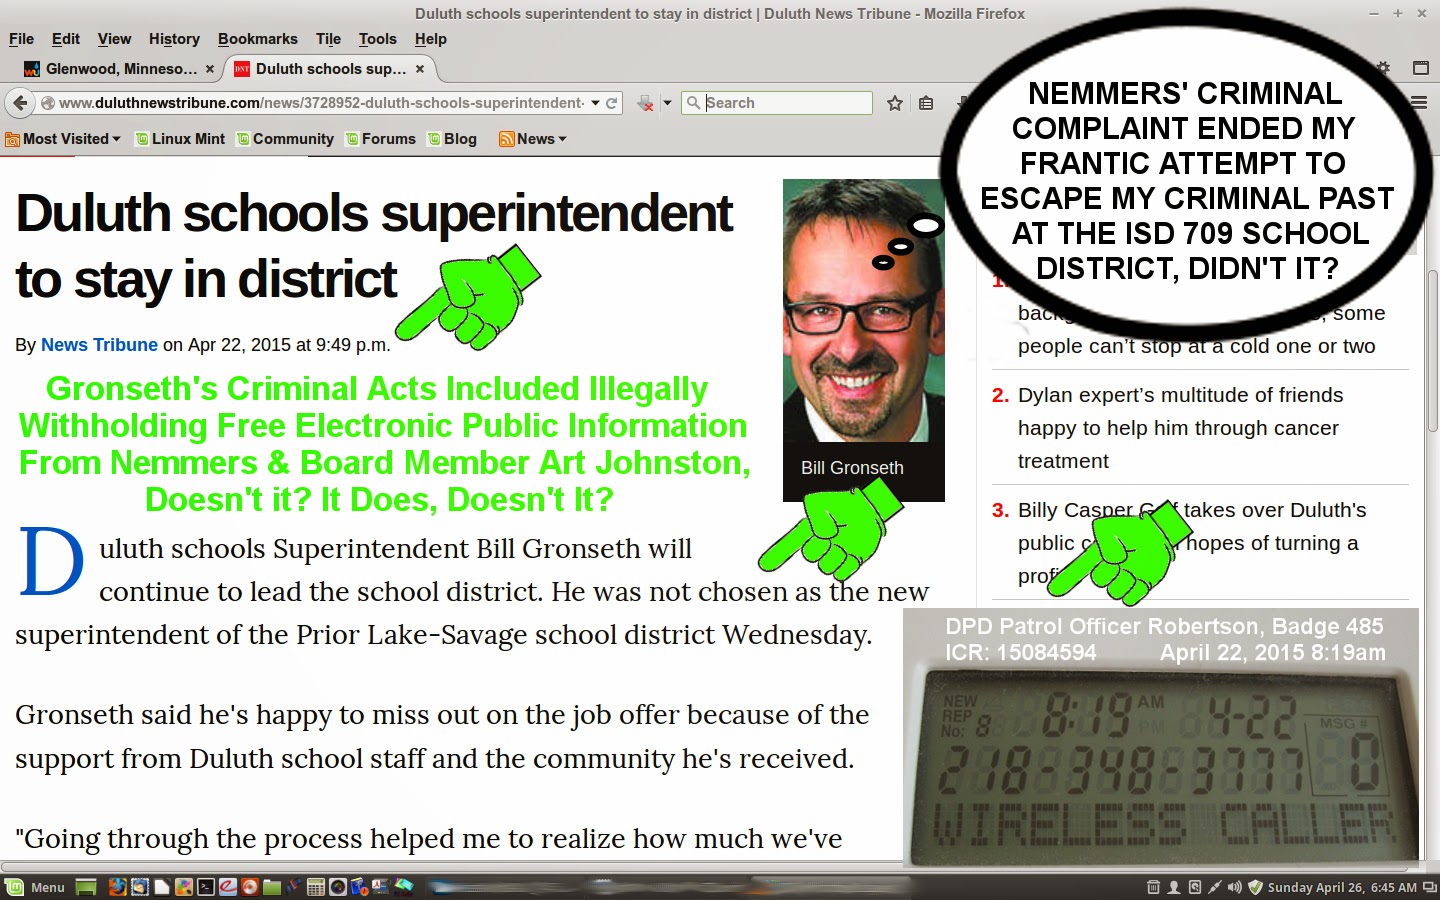 Lion News: ISD 709's Corrupt Superintendent Bill Gronseth Given Another